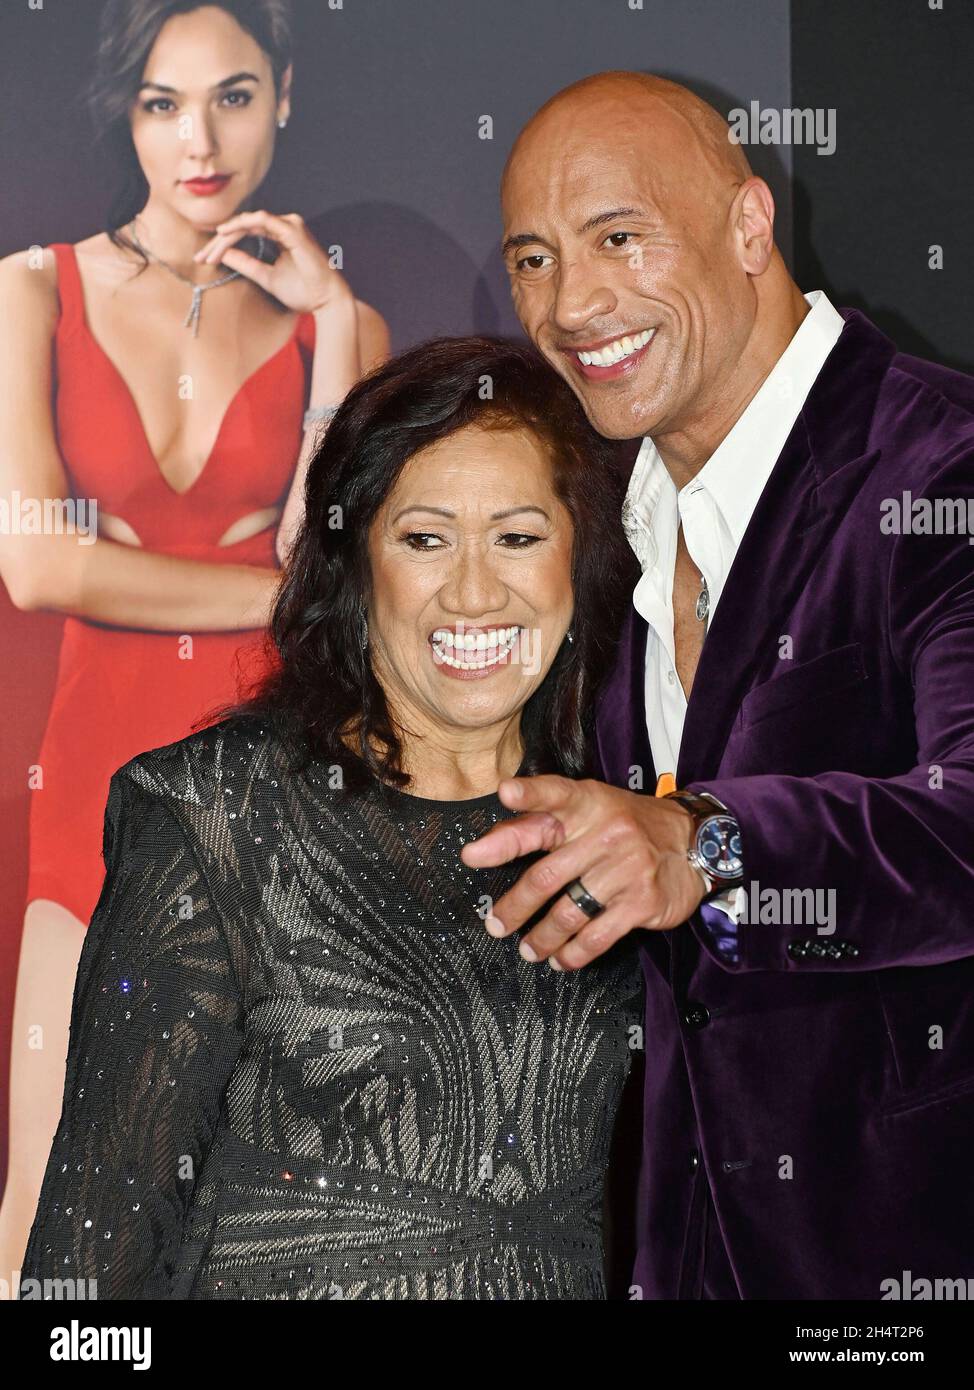 LOS ANGELES, CA - NOVEMBER 03: Ata Johnson (L) and Dwayne Johnson attend the World Premiere Of Netflix's 'Red Notice' at L.A. LIVE on November 03, 2021 in Los Angeles, California. Stock Photo